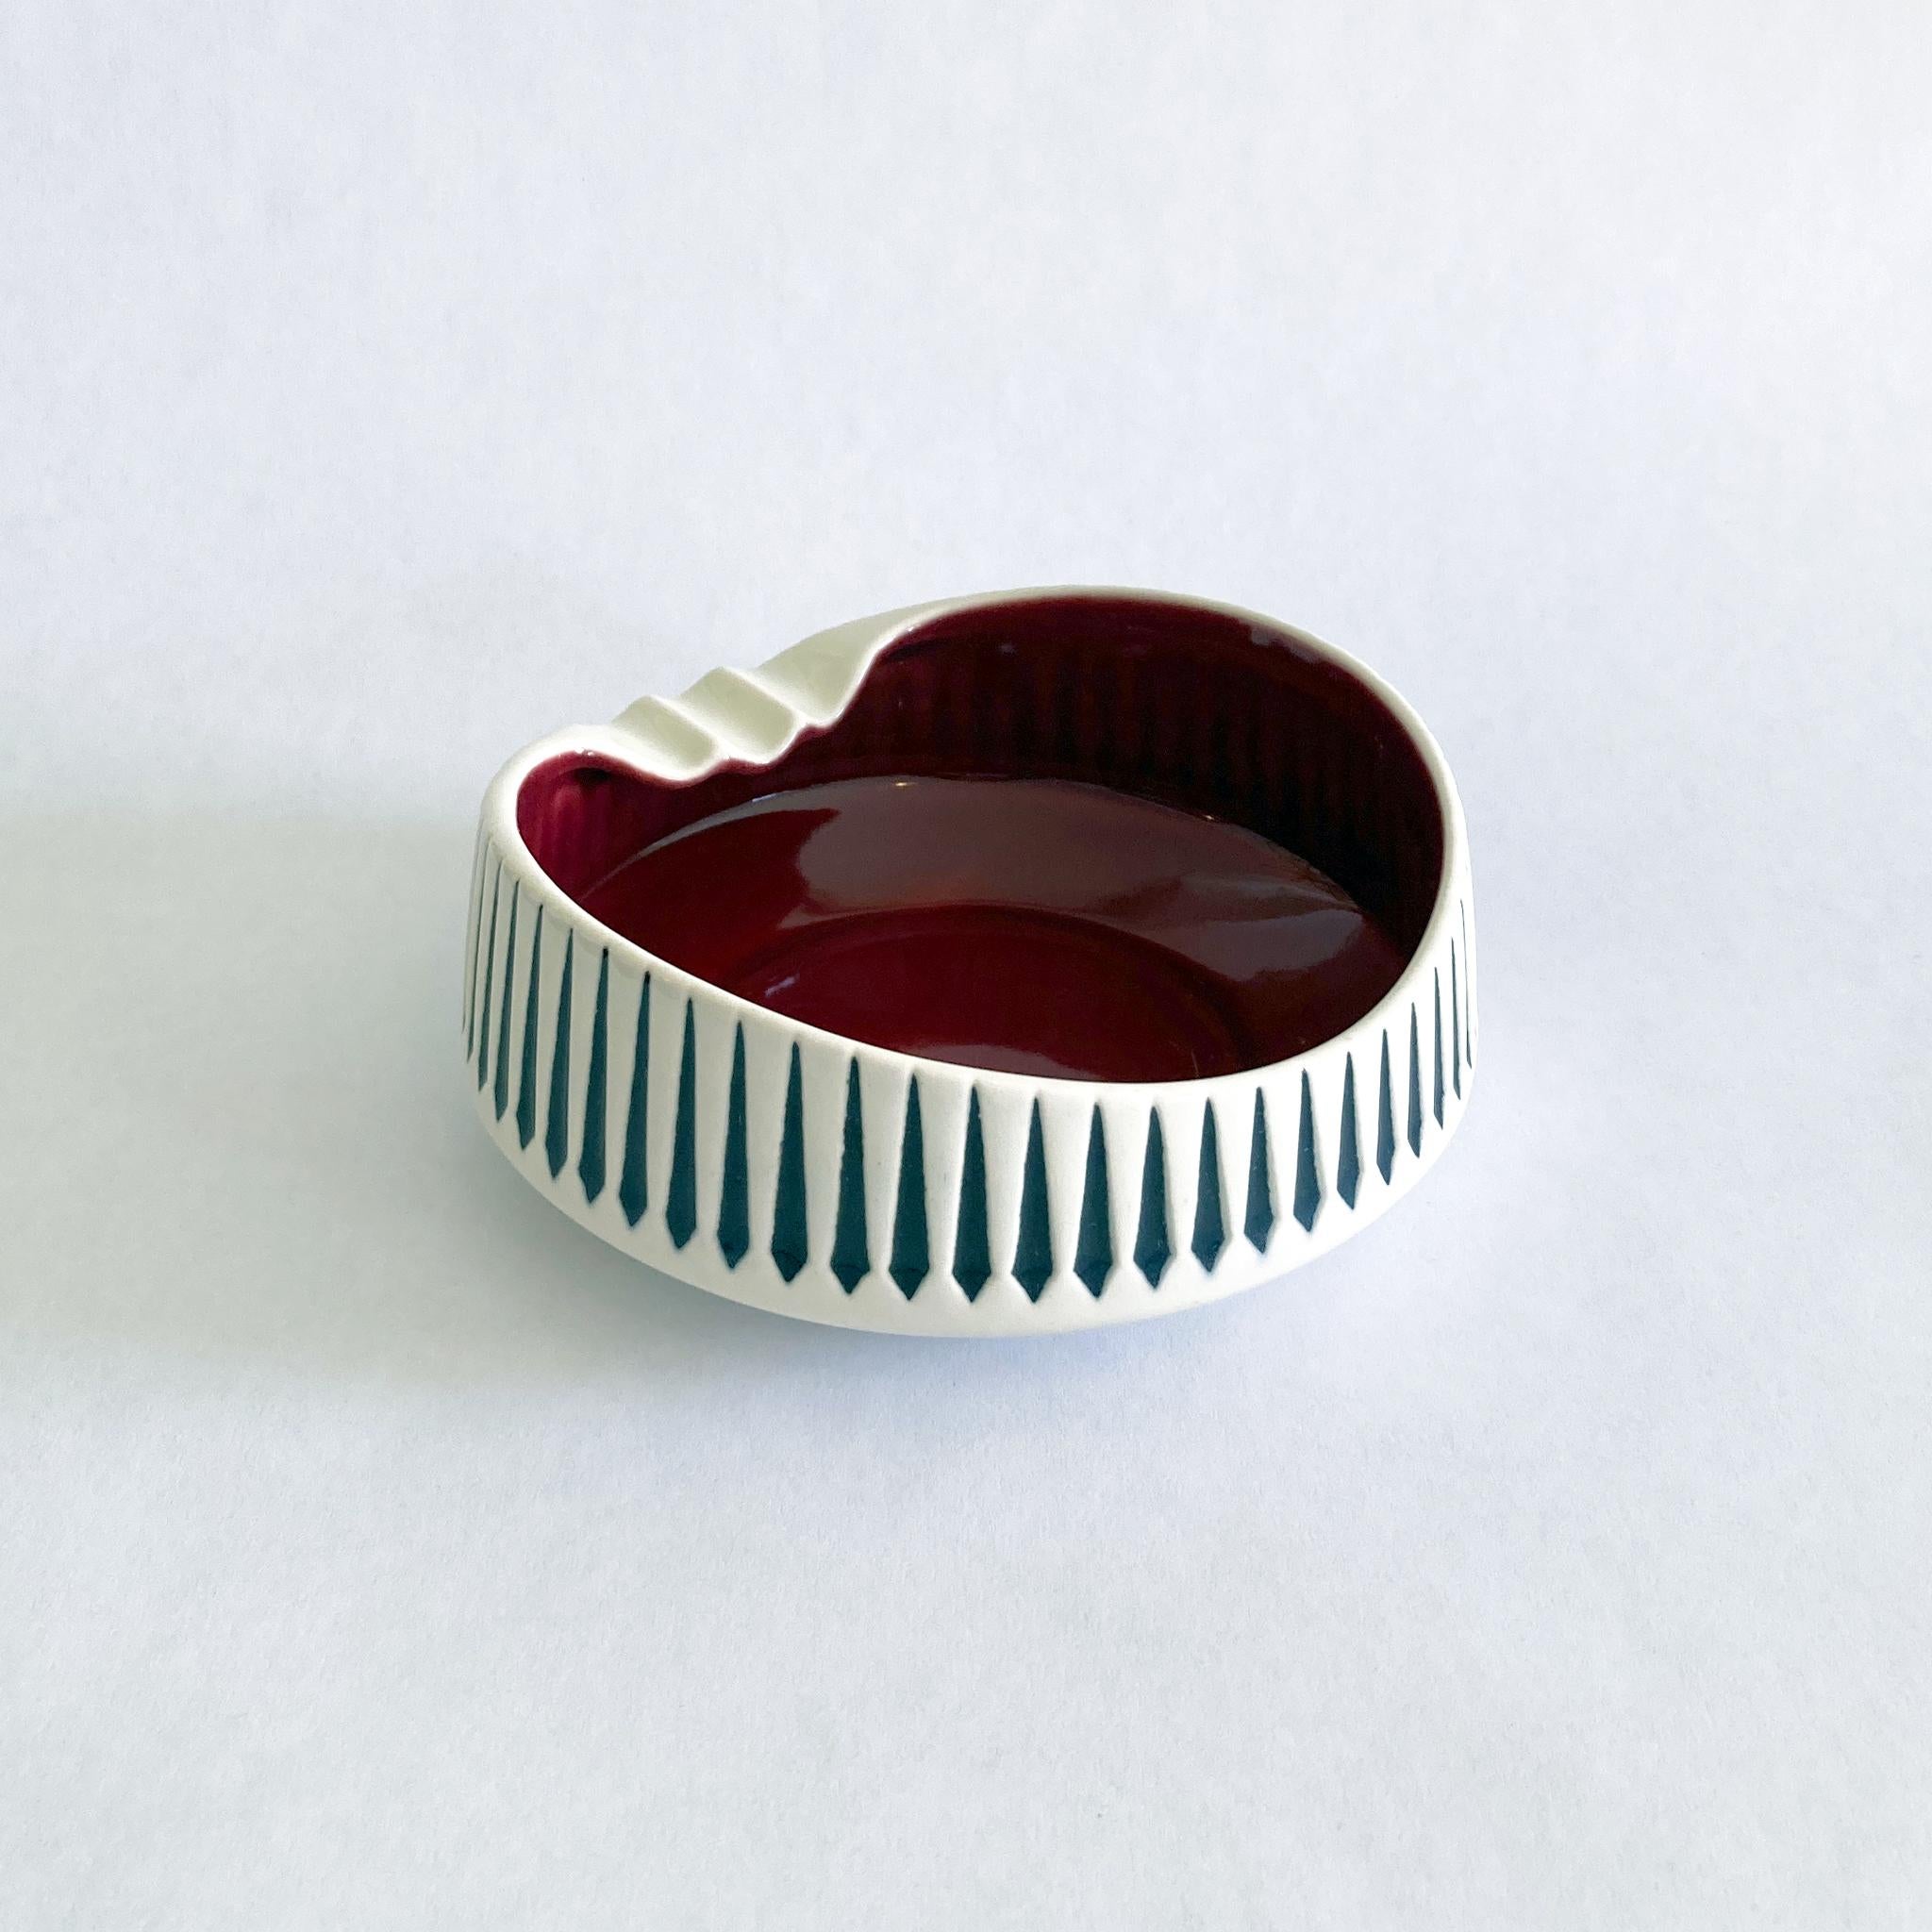 English Hornsea Pottery by John Clappison Vide Poche in White, Black and Burgundy, 1950s For Sale